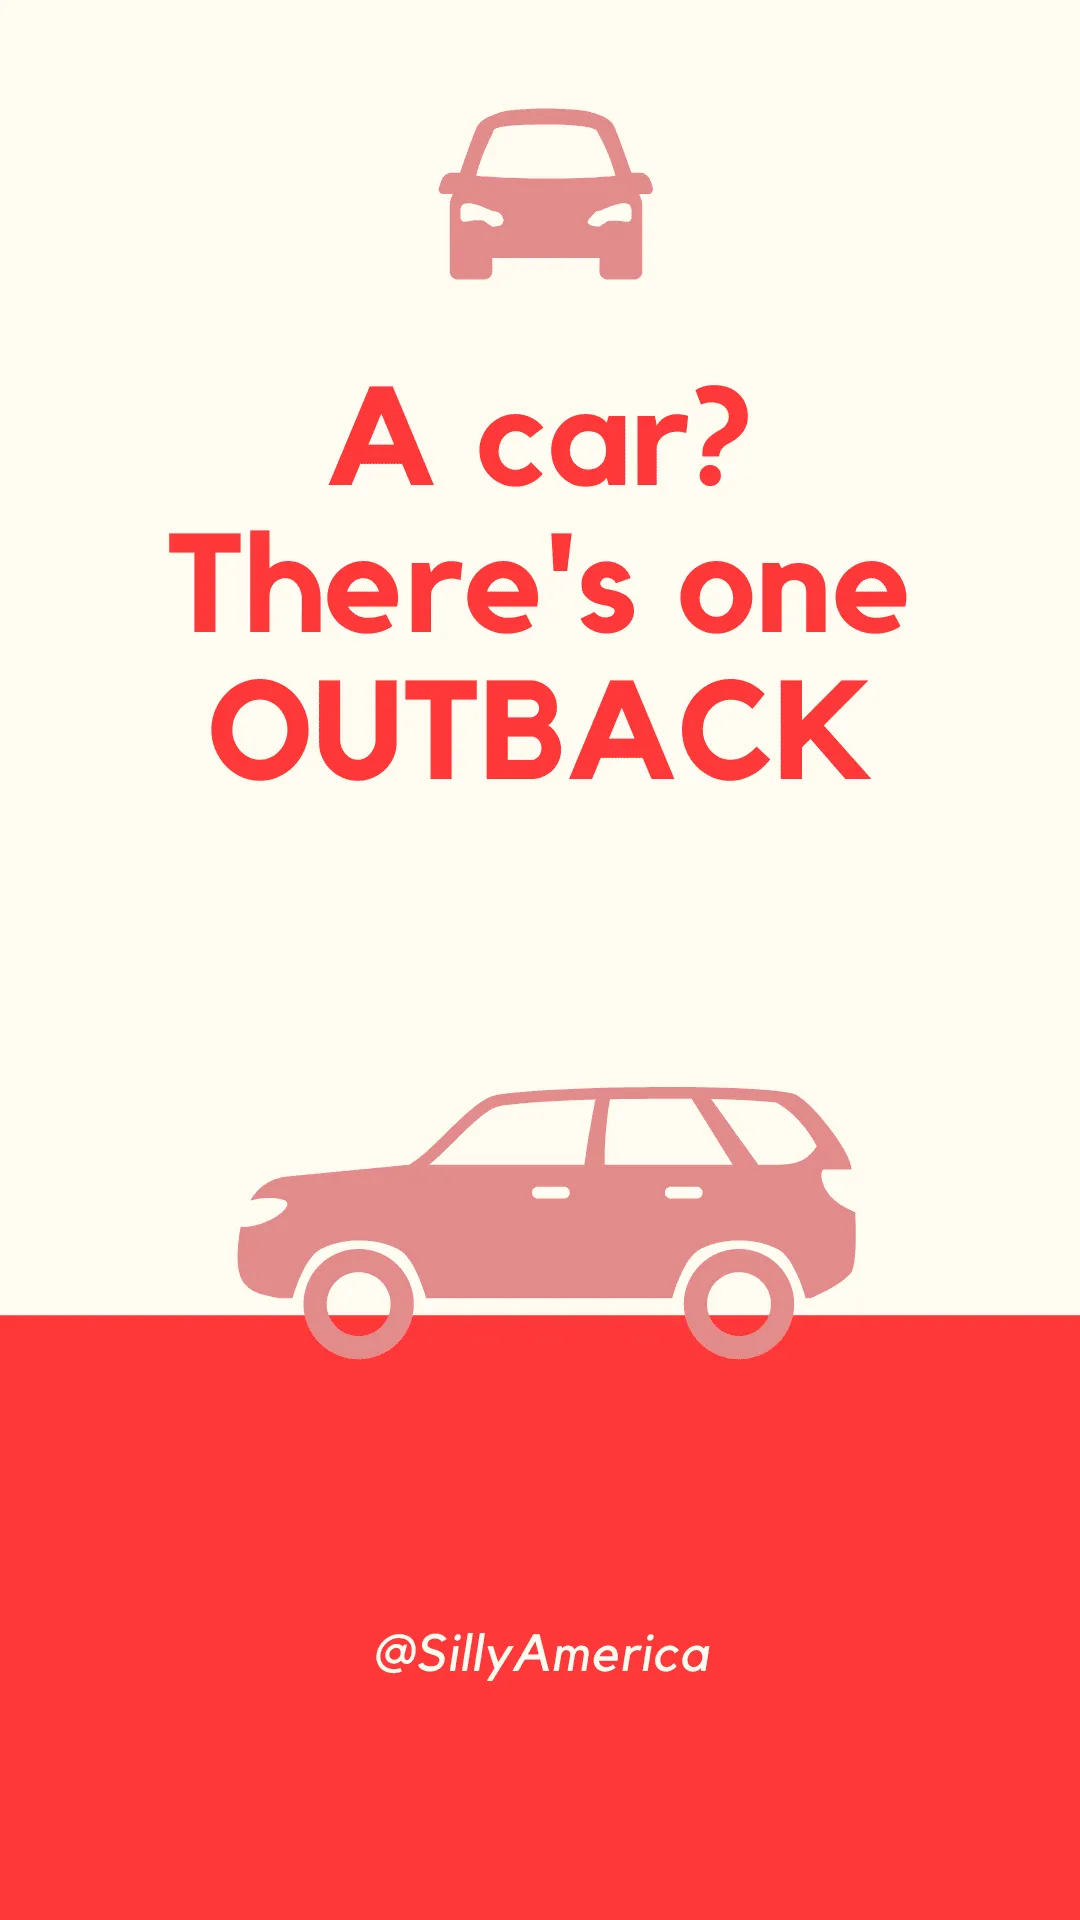 A car? There's one OUTBACK. - Car Puns to fuel your road trip content!